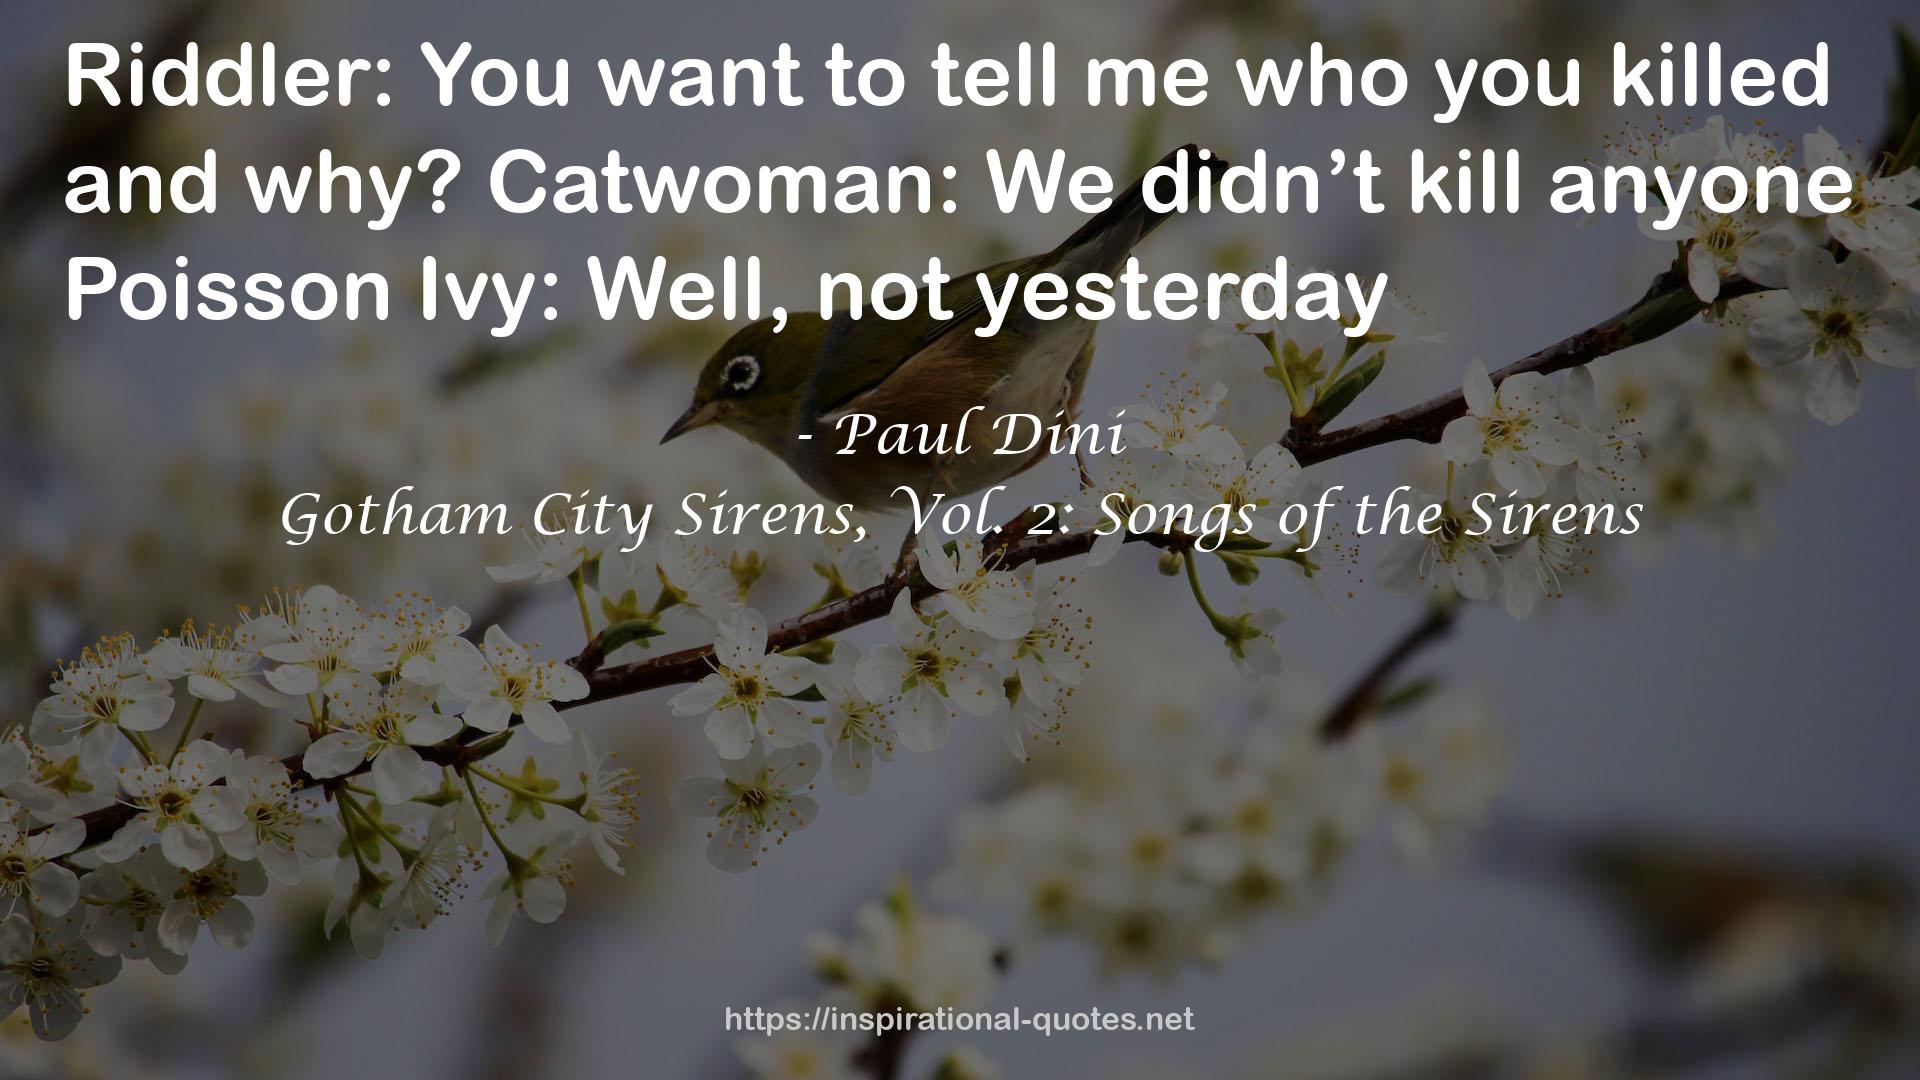 Gotham City Sirens, Vol. 2: Songs of the Sirens QUOTES